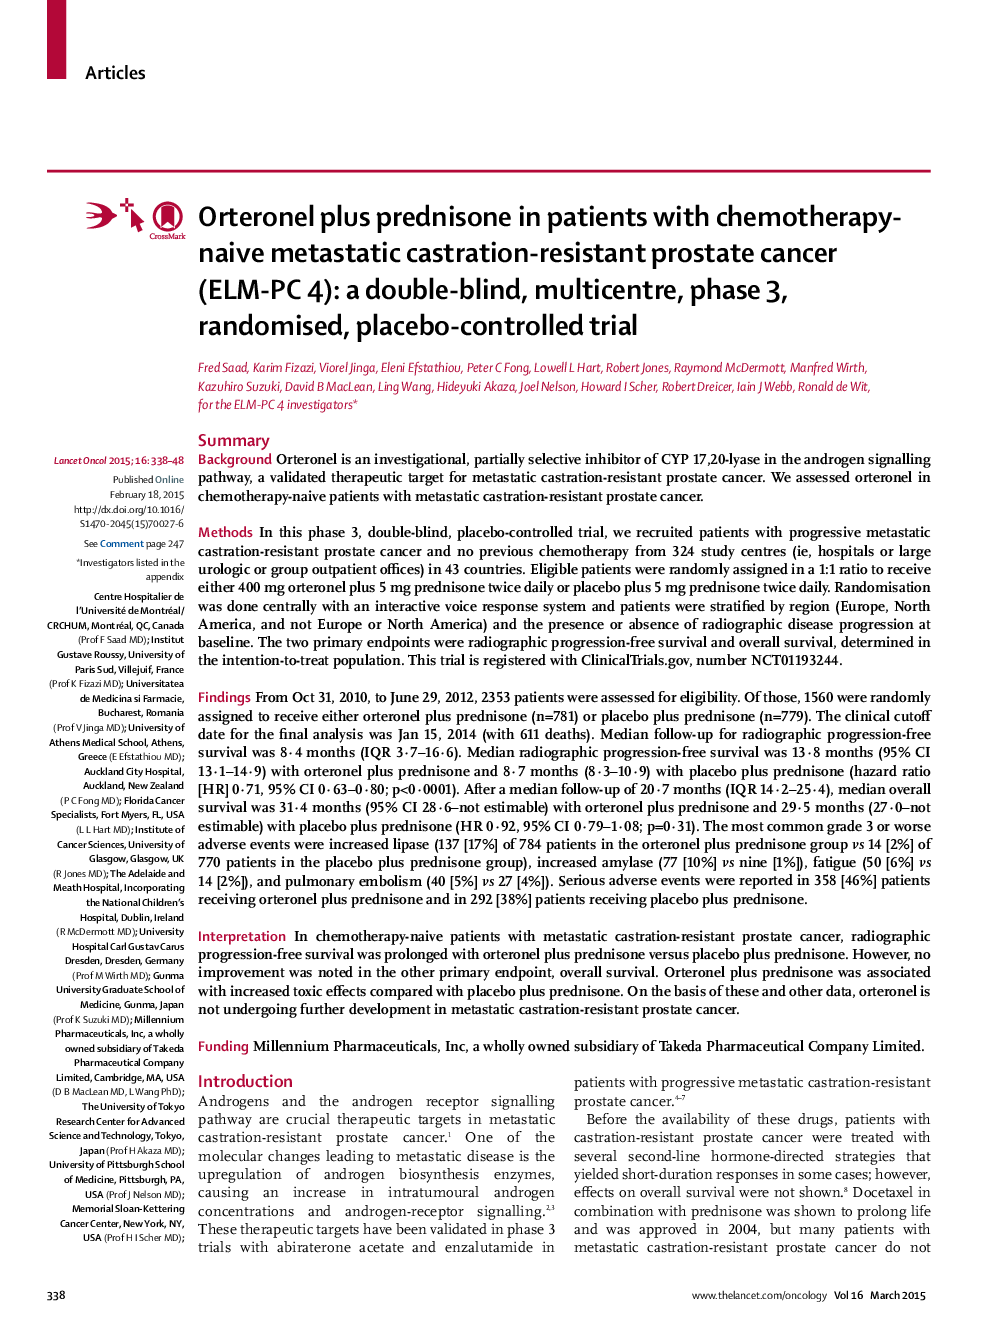 Orteronel plus prednisone in patients with chemotherapy-naive metastatic castration-resistant prostate cancer (ELM-PC 4): a double-blind, multicentre, phase 3, randomised, placebo-controlled trial